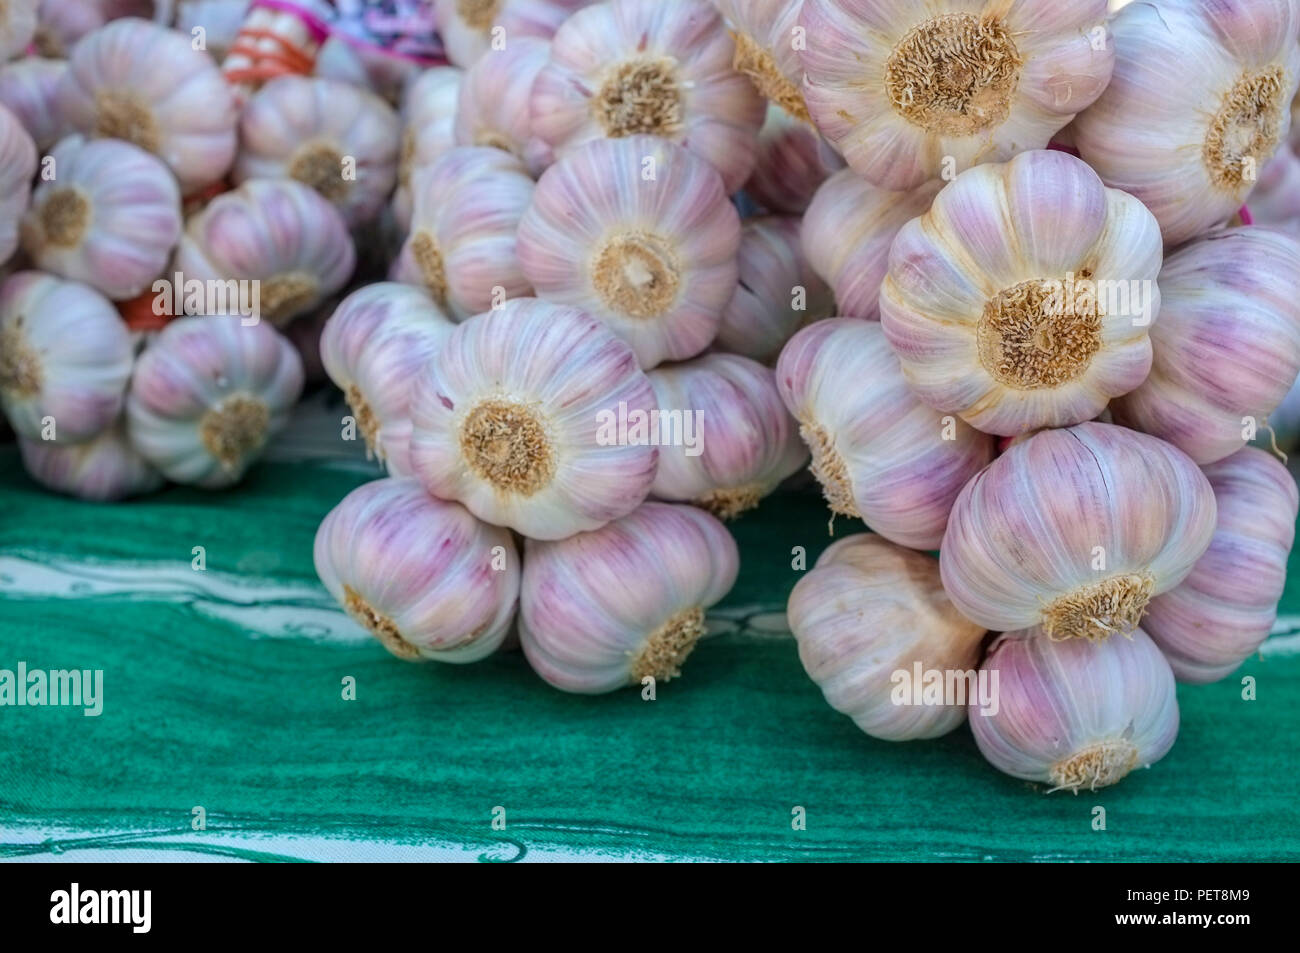 Garlic bulbs for sale on a market stall in Provence, France. Stock Photo